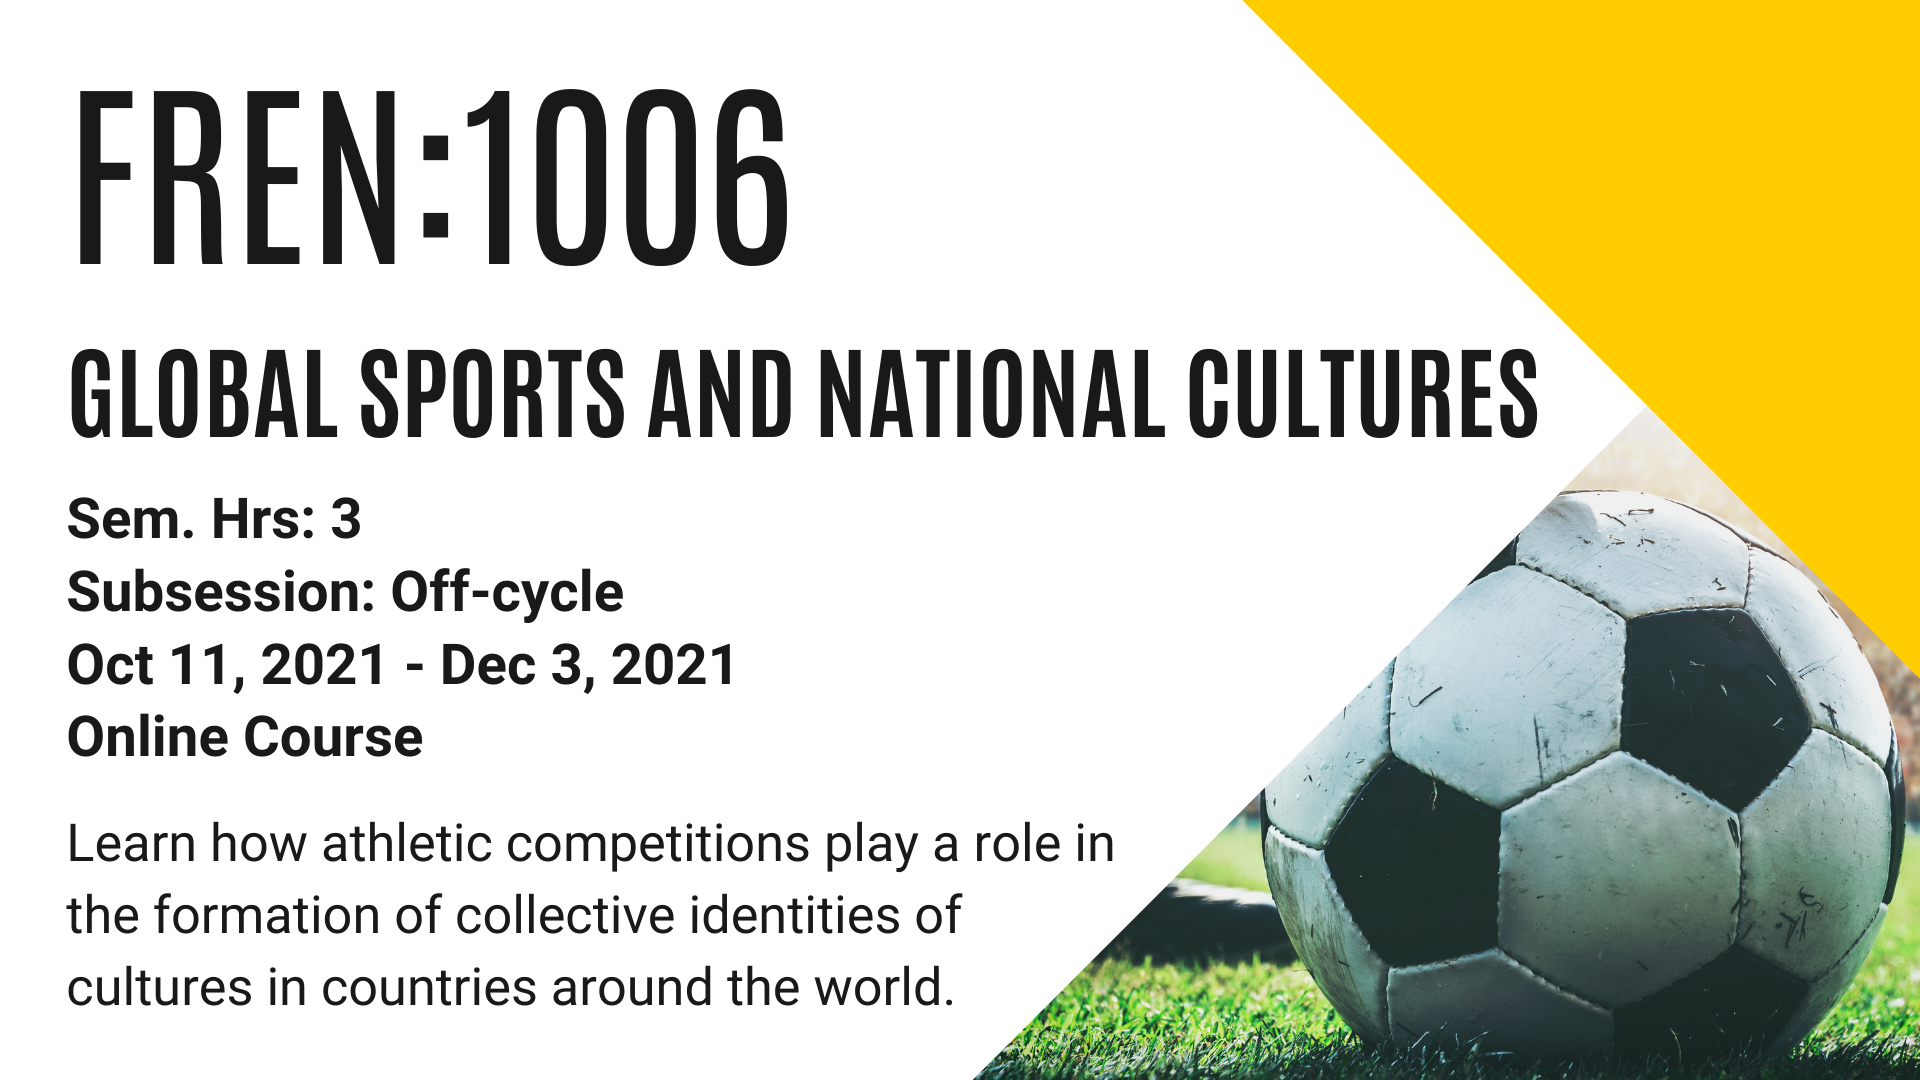 FREN 1006 GLOBAL SPORTS AND NATIONAL CULTURES Sem. Hrs: 3 Subsession: Off-cycle Oct 11, 2021 - Dec 3, 2021 Online Course Learn how athletic competitions play a role in the formation of collective identities of cultures in countries around the world.